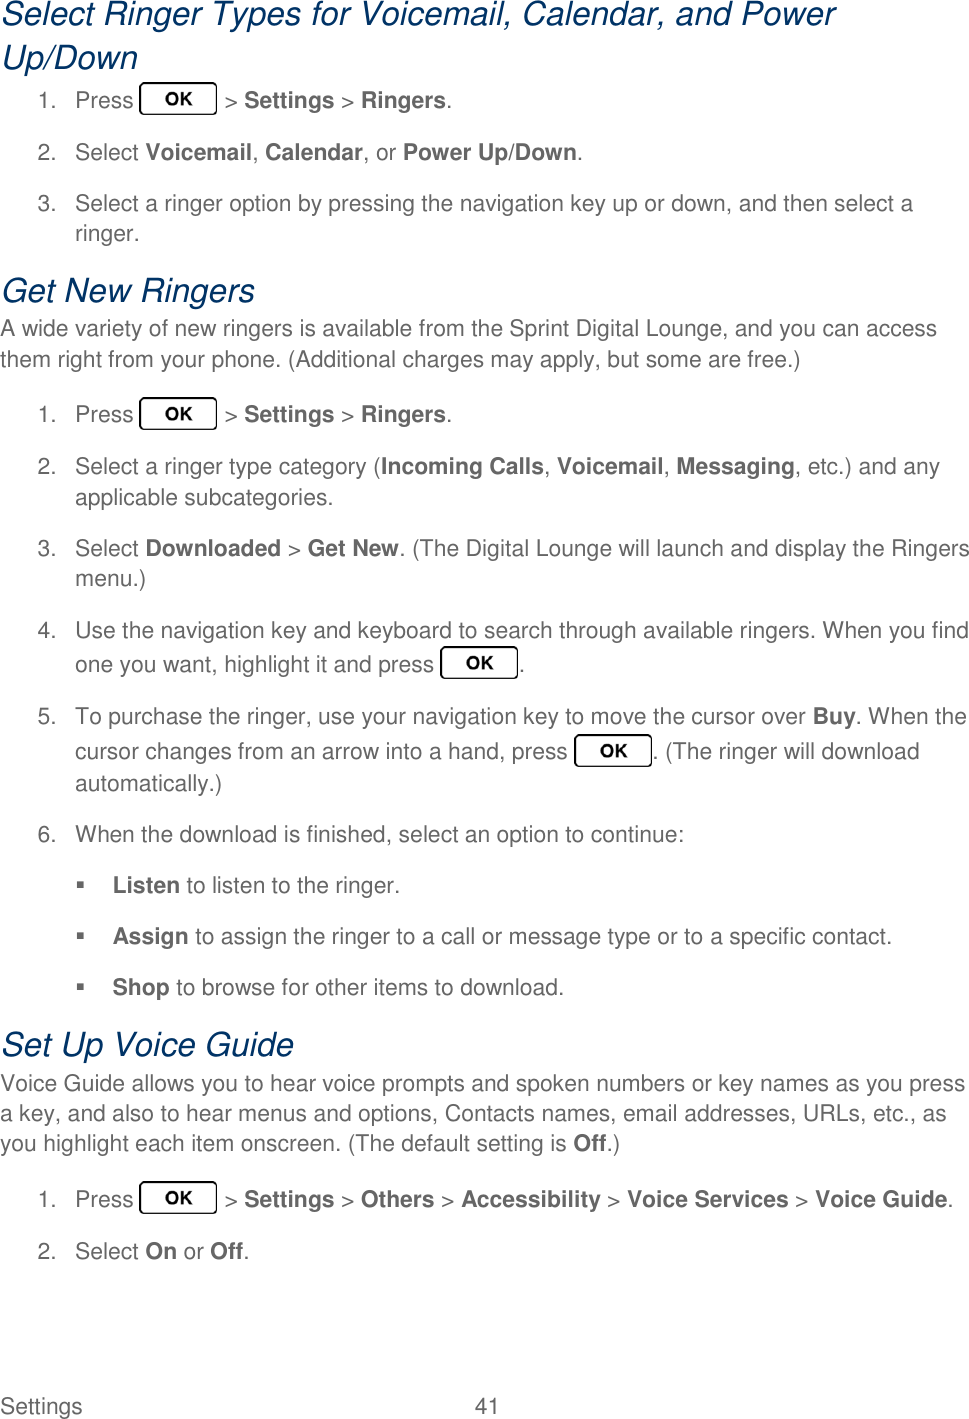 Settings  41   Select Ringer Types for Voicemail, Calendar, and Power Up/Down 1.  Press   &gt; Settings &gt; Ringers. 2.  Select Voicemail, Calendar, or Power Up/Down. 3.  Select a ringer option by pressing the navigation key up or down, and then select a ringer. Get New Ringers A wide variety of new ringers is available from the Sprint Digital Lounge, and you can access them right from your phone. (Additional charges may apply, but some are free.) 1.  Press   &gt; Settings &gt; Ringers. 2.  Select a ringer type category (Incoming Calls, Voicemail, Messaging, etc.) and any applicable subcategories. 3.  Select Downloaded &gt; Get New. (The Digital Lounge will launch and display the Ringers menu.) 4.  Use the navigation key and keyboard to search through available ringers. When you find one you want, highlight it and press  . 5.  To purchase the ringer, use your navigation key to move the cursor over Buy. When the cursor changes from an arrow into a hand, press  . (The ringer will download automatically.) 6.  When the download is finished, select an option to continue:  Listen to listen to the ringer.  Assign to assign the ringer to a call or message type or to a specific contact.  Shop to browse for other items to download. Set Up Voice Guide Voice Guide allows you to hear voice prompts and spoken numbers or key names as you press a key, and also to hear menus and options, Contacts names, email addresses, URLs, etc., as you highlight each item onscreen. (The default setting is Off.) 1.  Press   &gt; Settings &gt; Others &gt; Accessibility &gt; Voice Services &gt; Voice Guide. 2.  Select On or Off. 